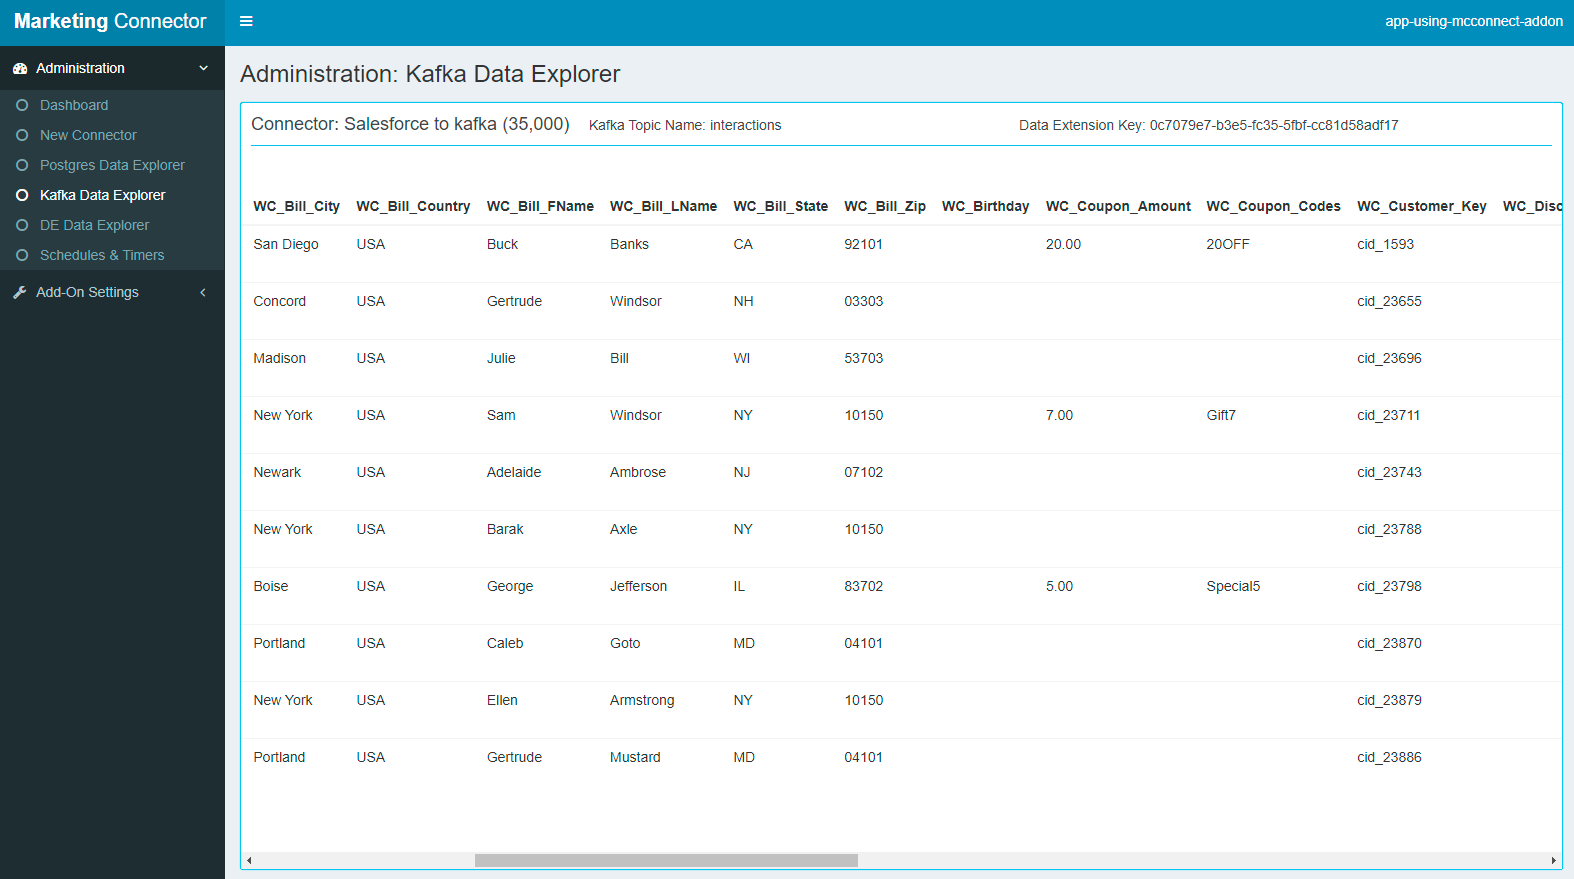 A screenshot of the Kafka Data Explorer Administration page showing synchronized marketing data rows.